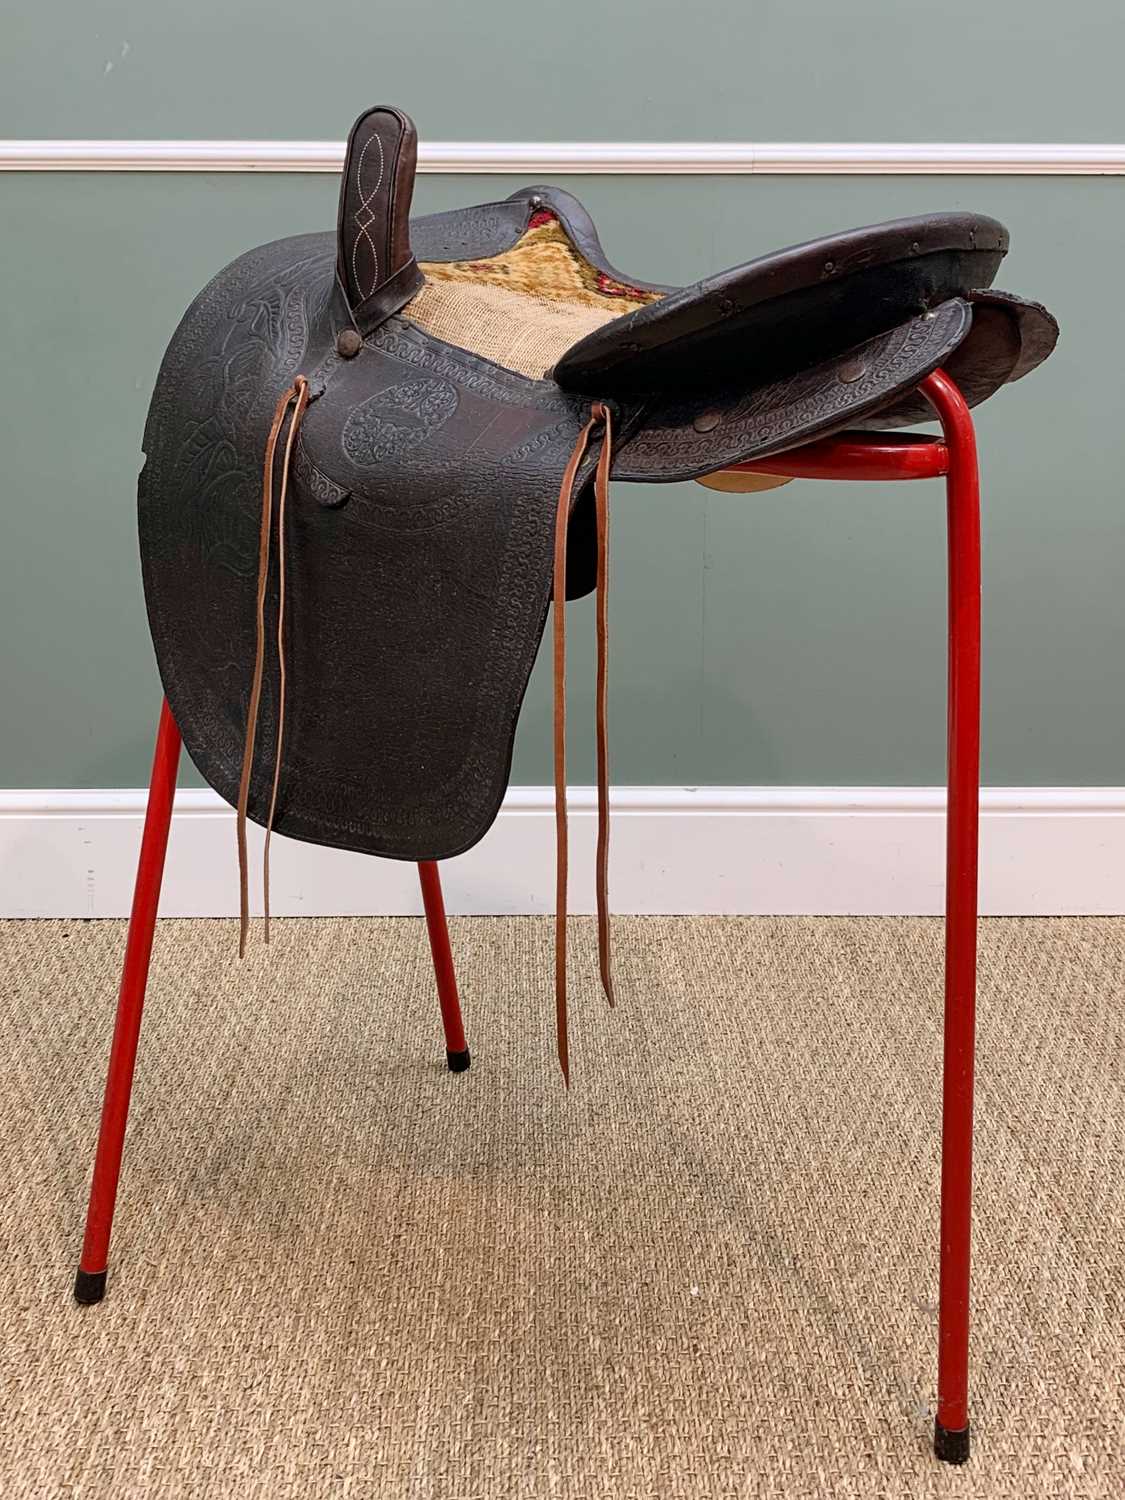 THE EQUESTRIAN CLUB HOUSE: TEXAS SIDE SADDLE, c. 1880, tooled leather and carpet seat, 66cms long - Image 4 of 5